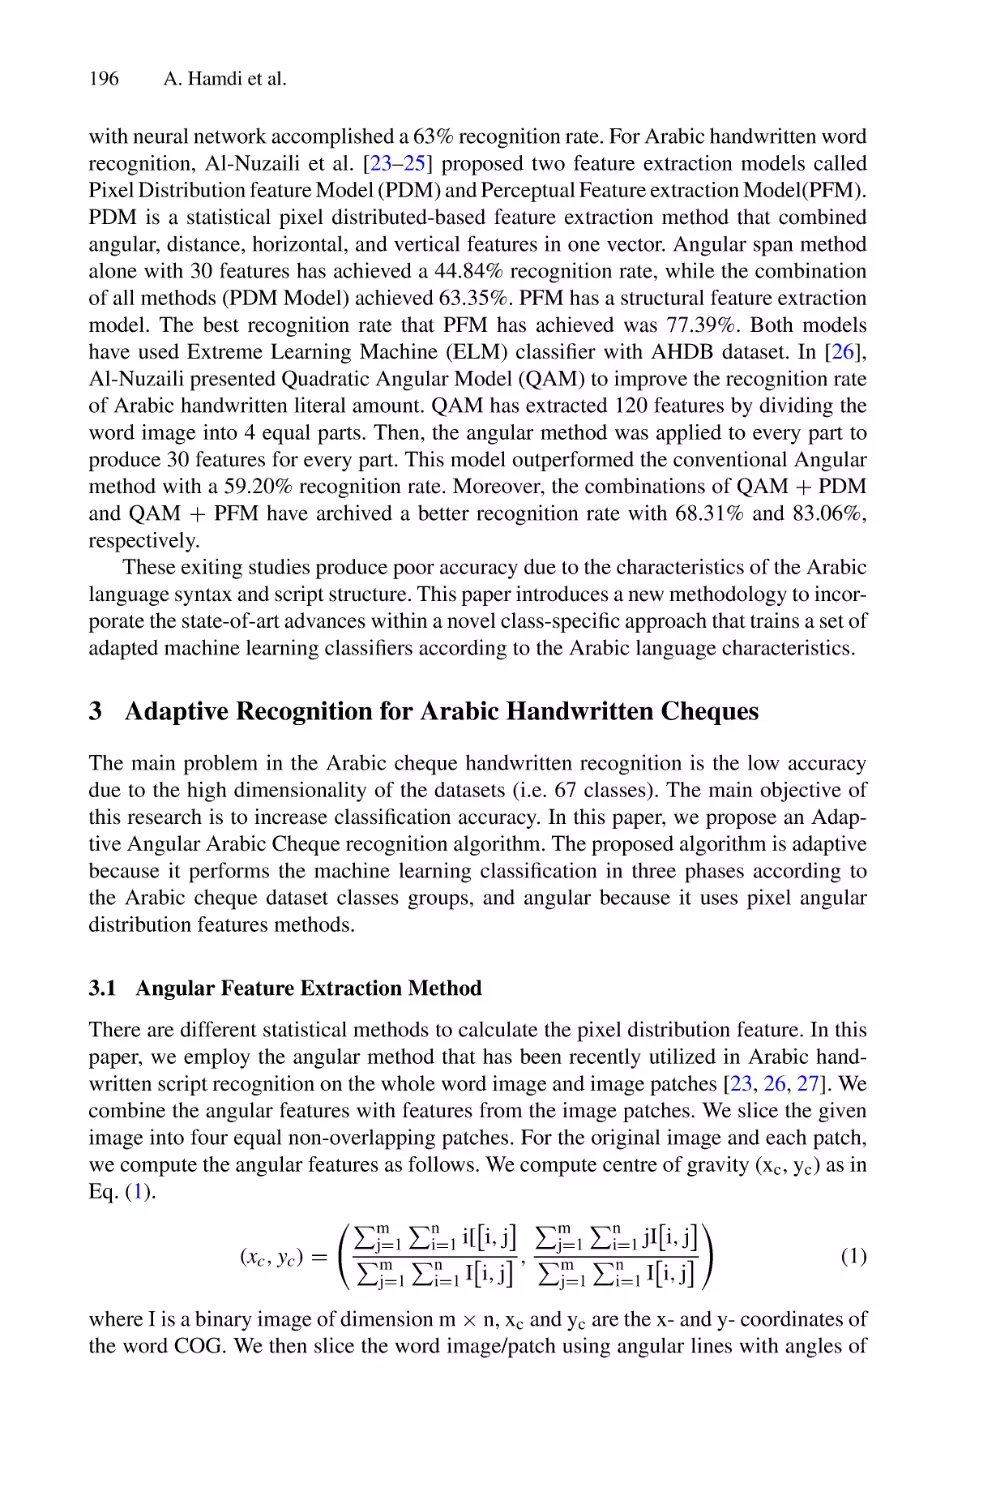 3 Adaptive Recognition for Arabic Handwritten Cheques
3.1 Angular Feature Extraction Method